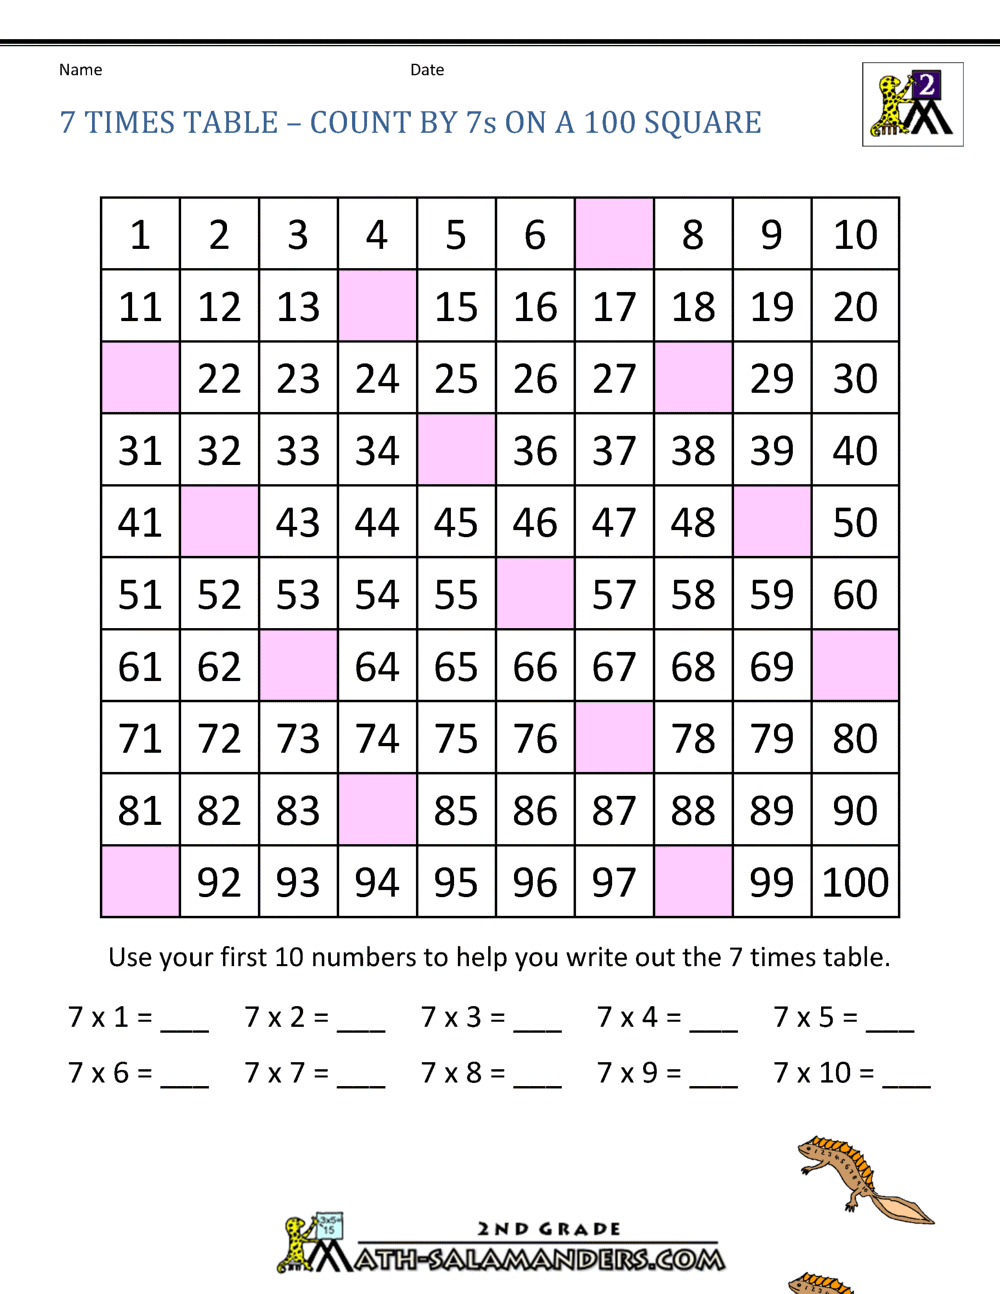 Times Table Chart All The Way To 100